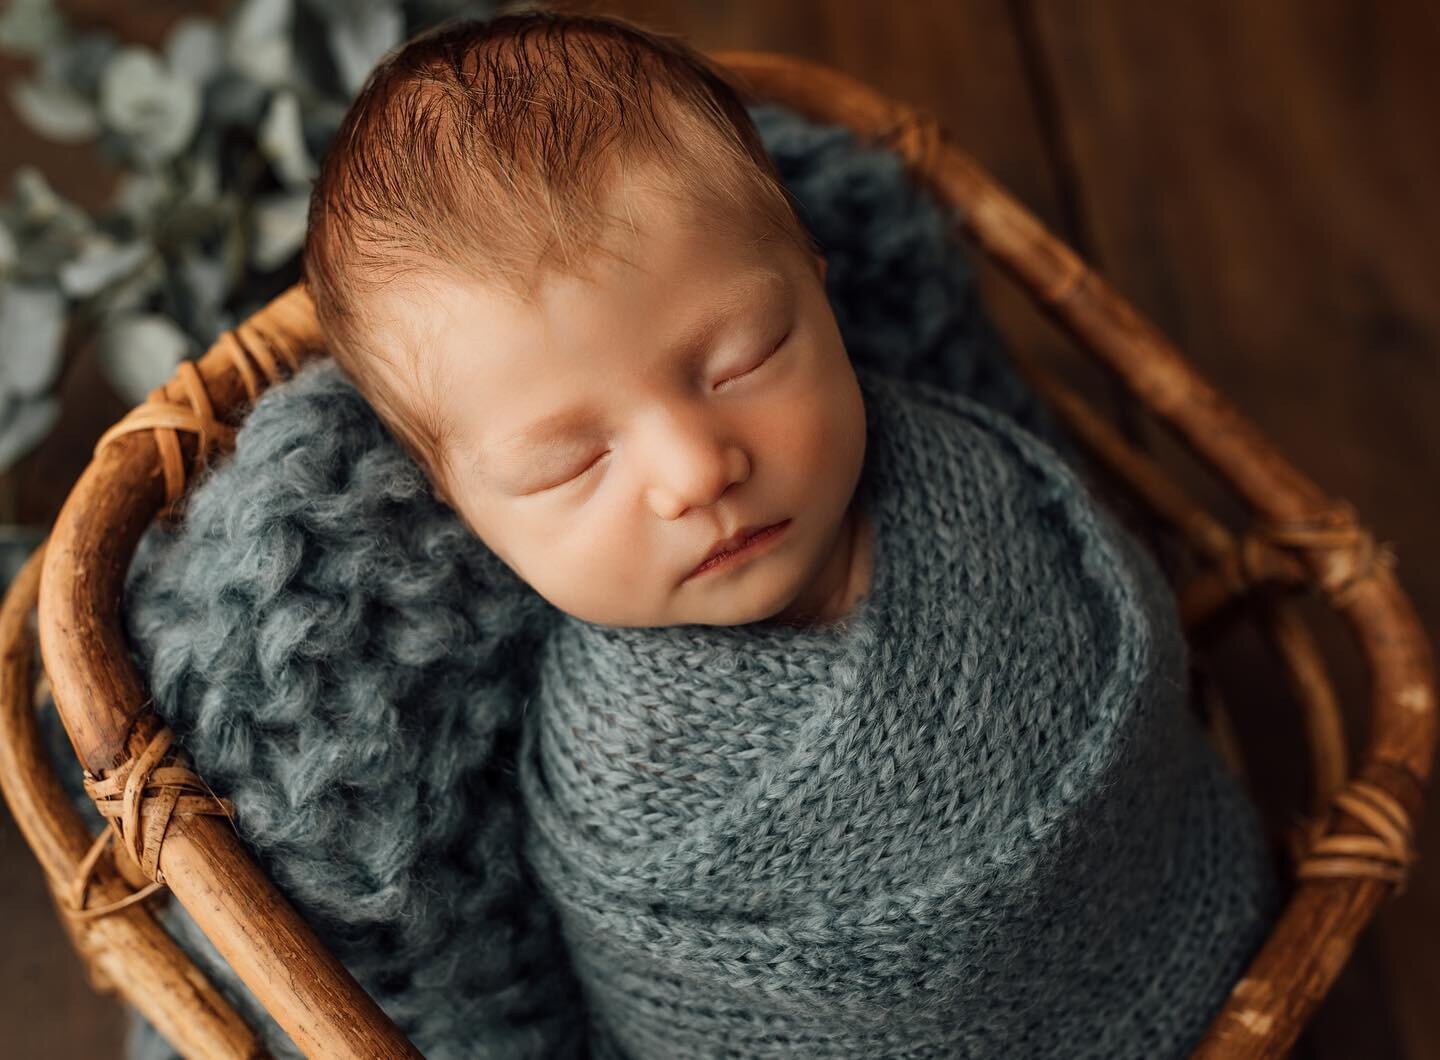 Newborn Photographer Mentor Sessions: August - January 2023 mentor sessions will soon be found online! Just starting out or maybe you&rsquo;ve been in the photography business for years but need to brush up your skills? Want to build up your newborn 